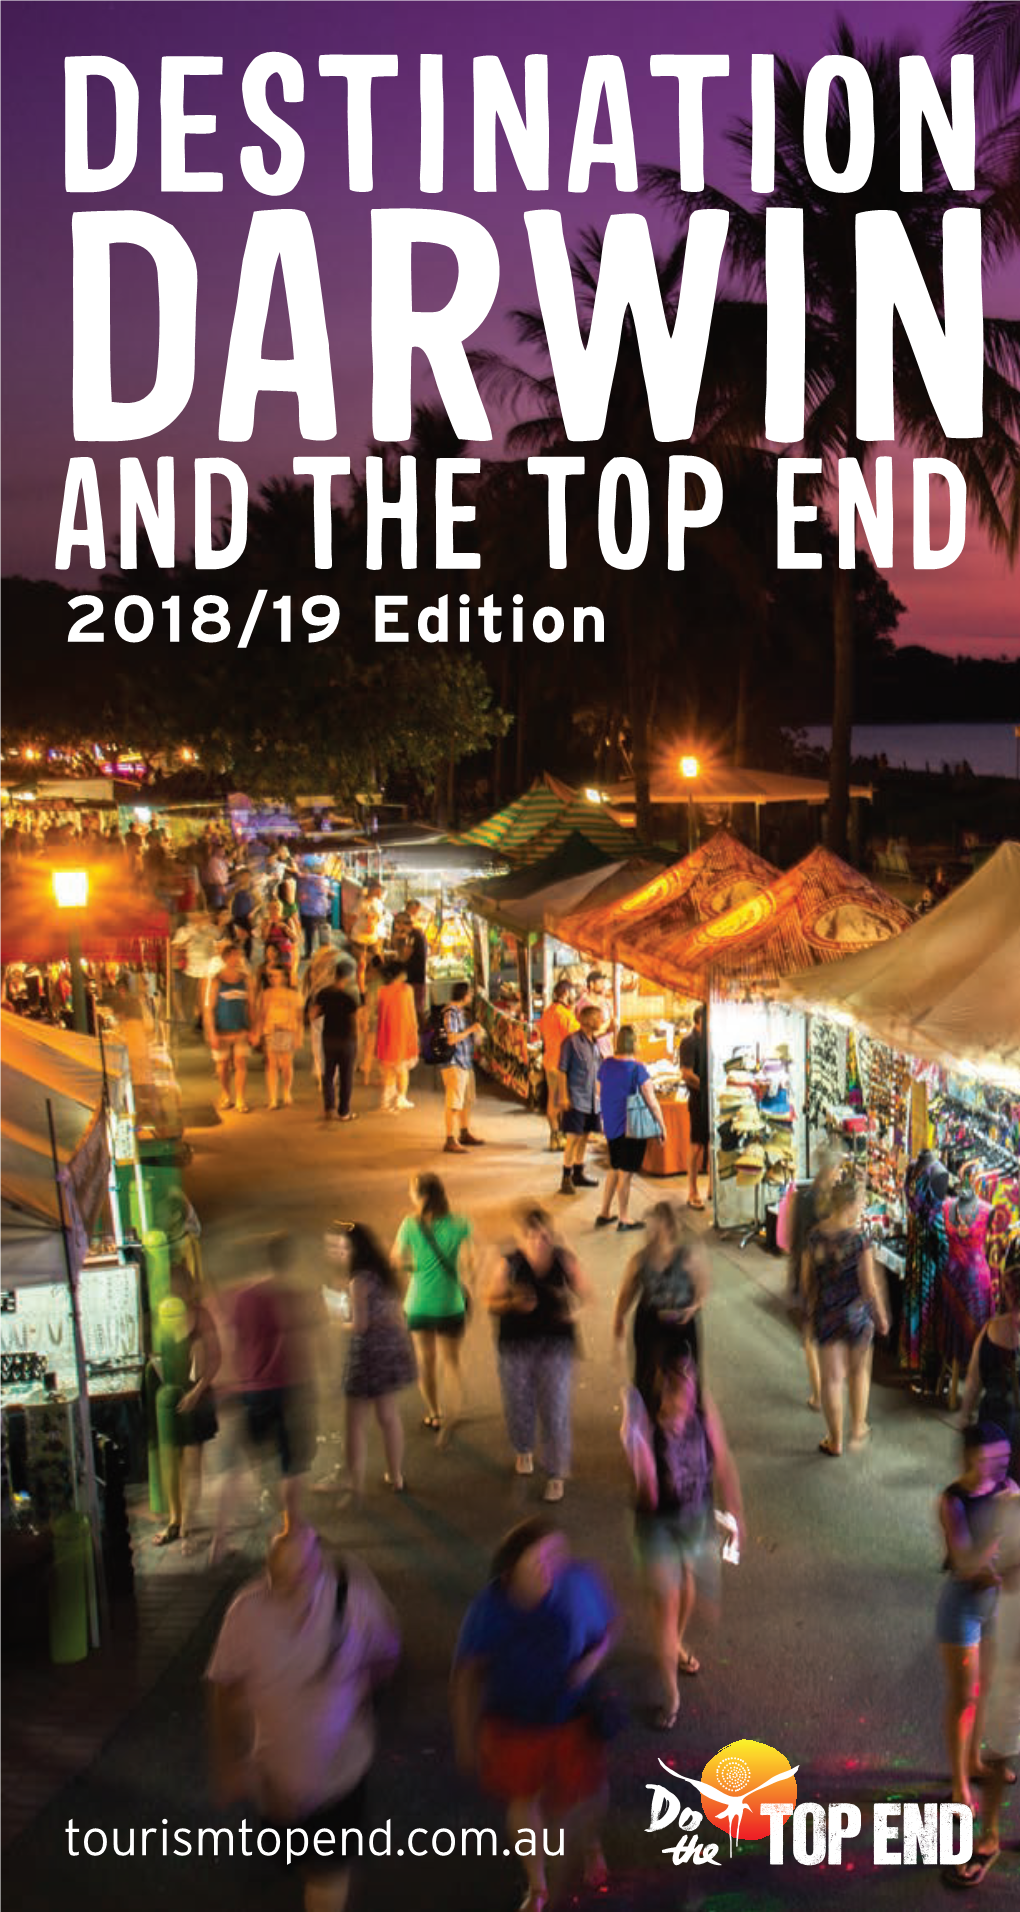 DESTINATION DARWIN and the TOP END 2018/19 Edition